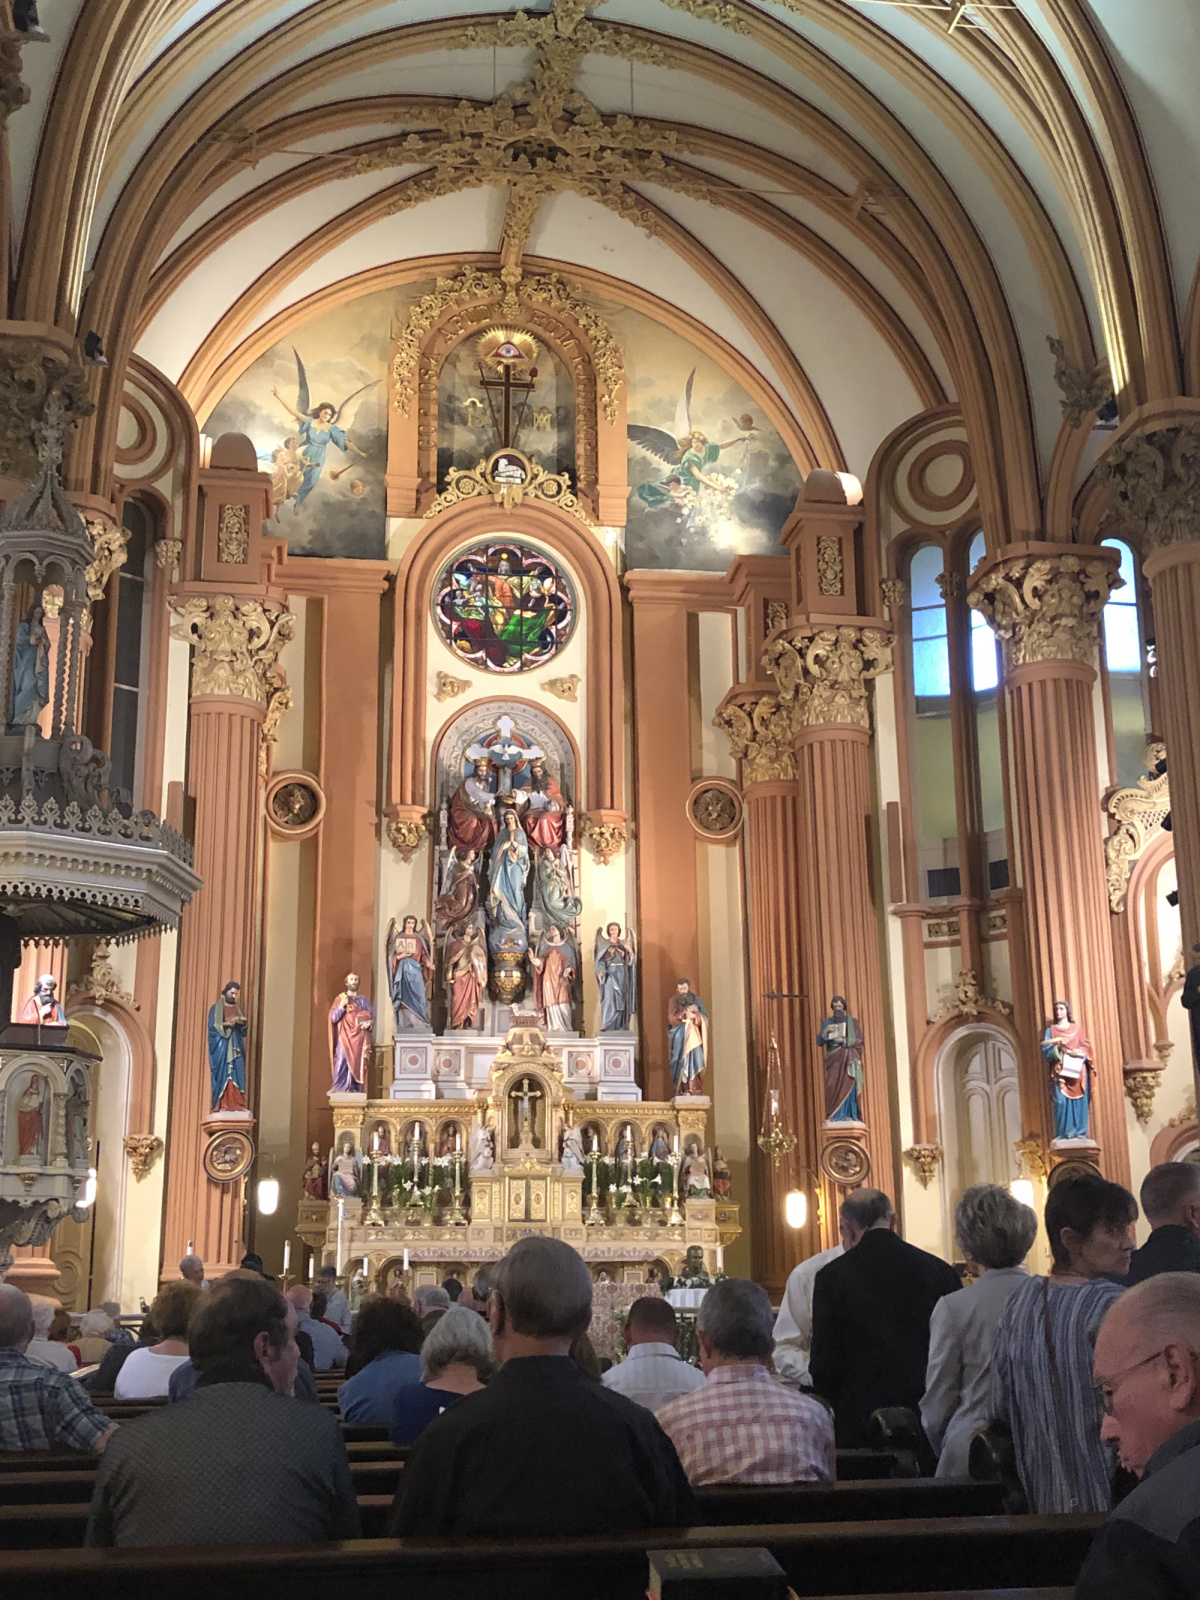 Fr. Seelos Mass at St. Mary’s Assumption Church in New Orleans